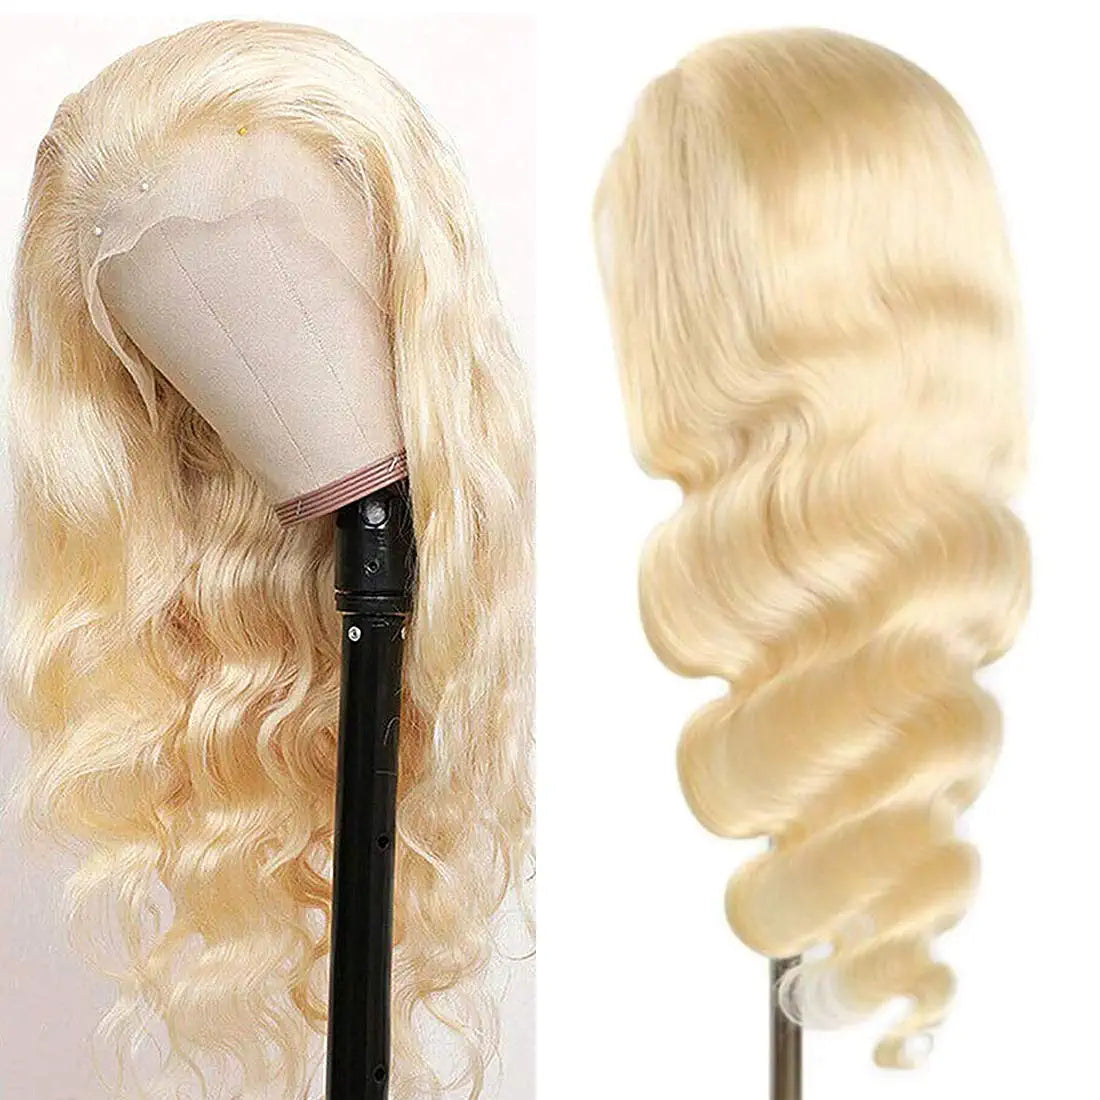 BLONDE BODY WAVE HUMAN HAIR LACE FRONT WIG 22''